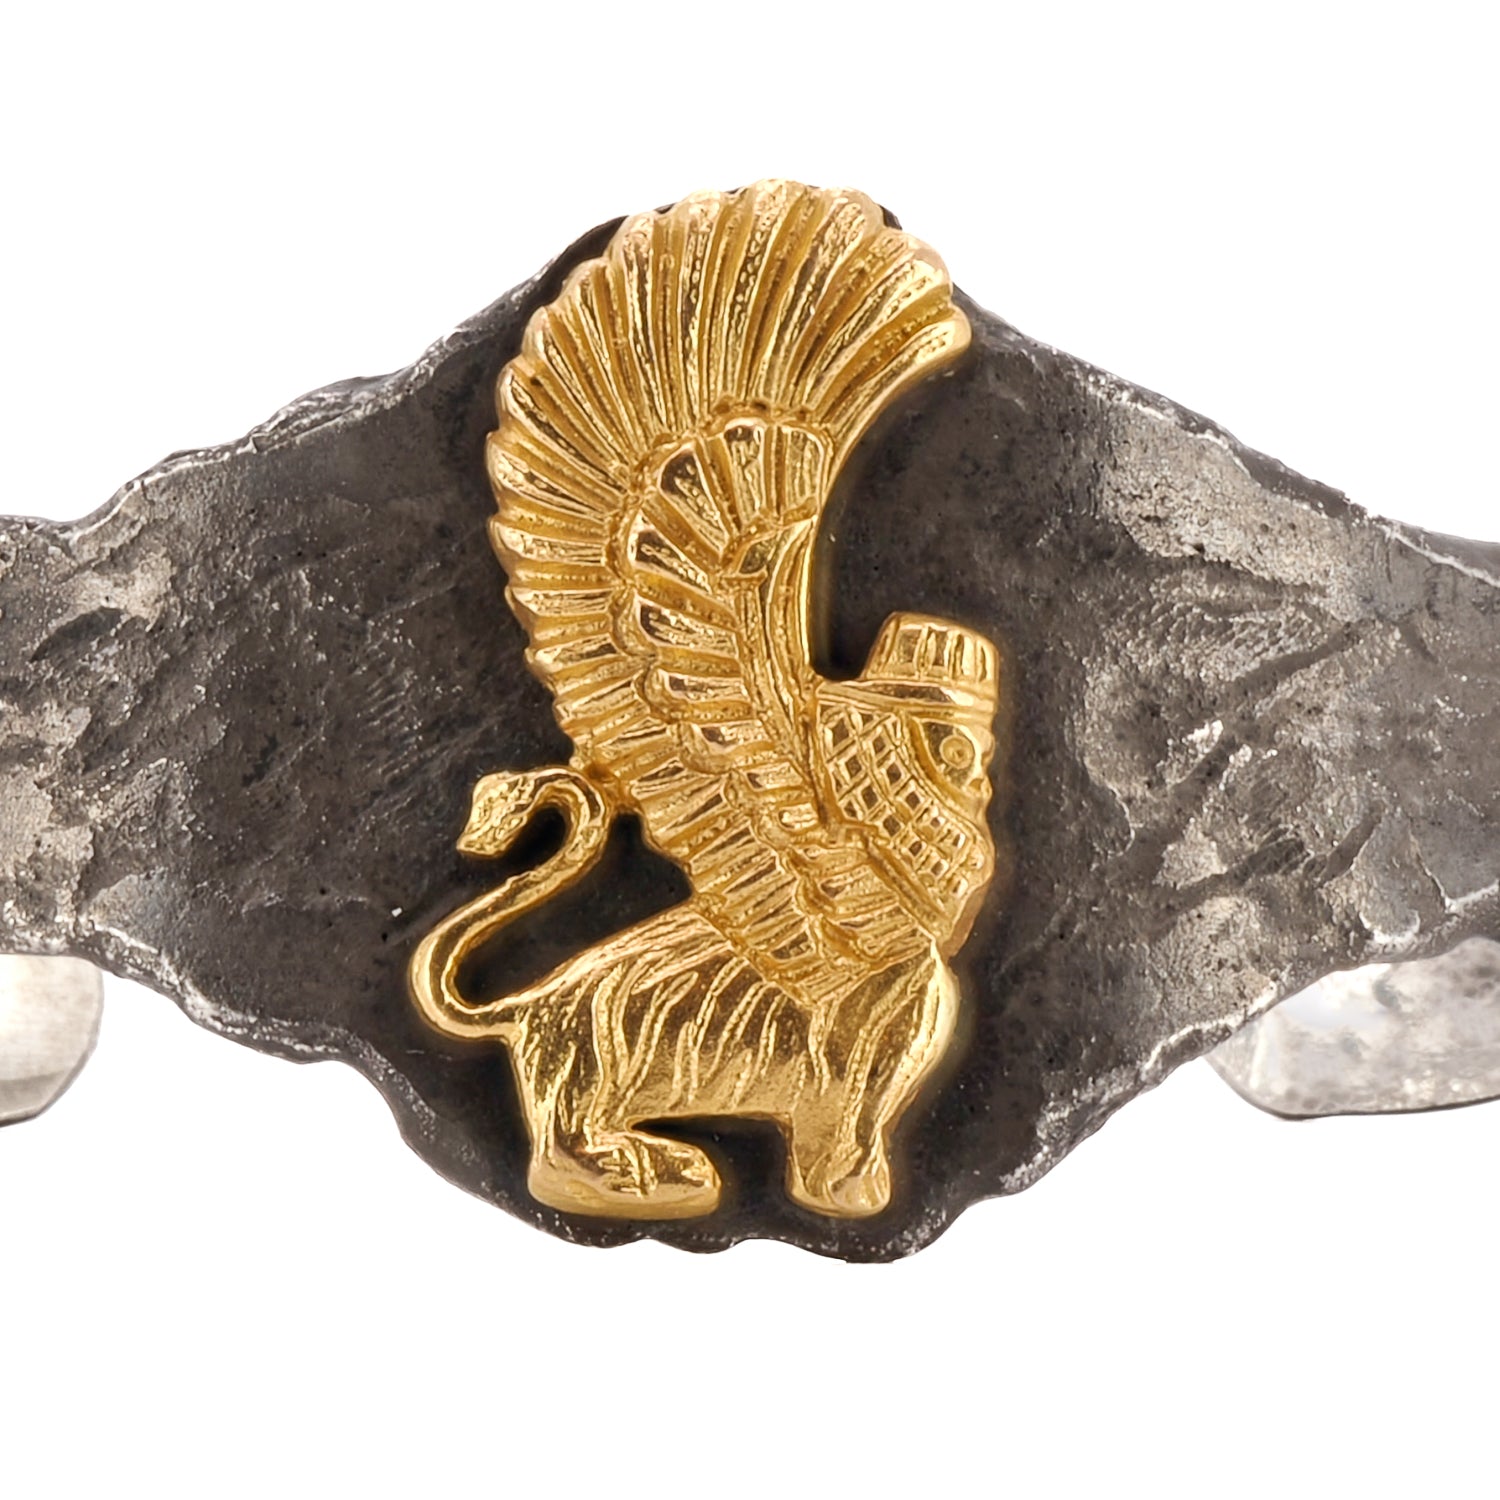 Handmade Jewelry: Sterling Silver and 18k Gold Lion Cuff Bracelet